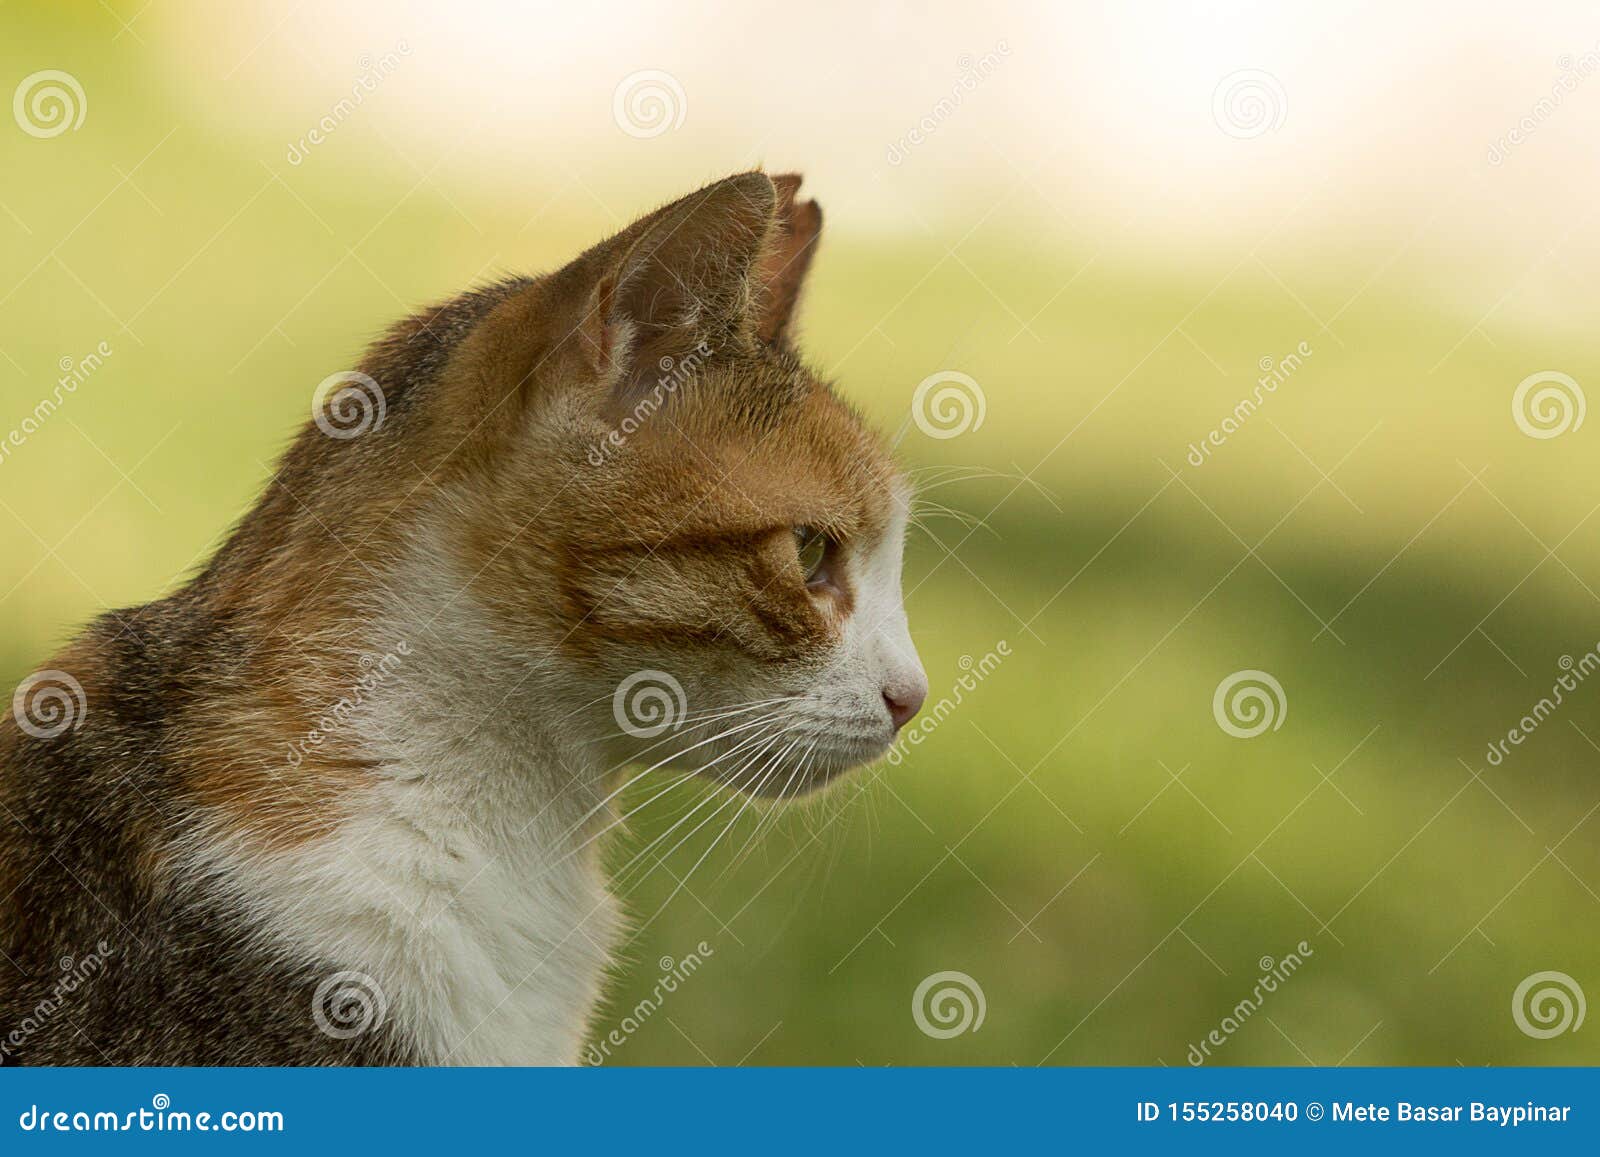 Profile Including Neck Shoulder And Head Of A Nice Stray Calico Cat With One Ear Bit Off Staring At Left Stock Photo Image Of Careful Attention